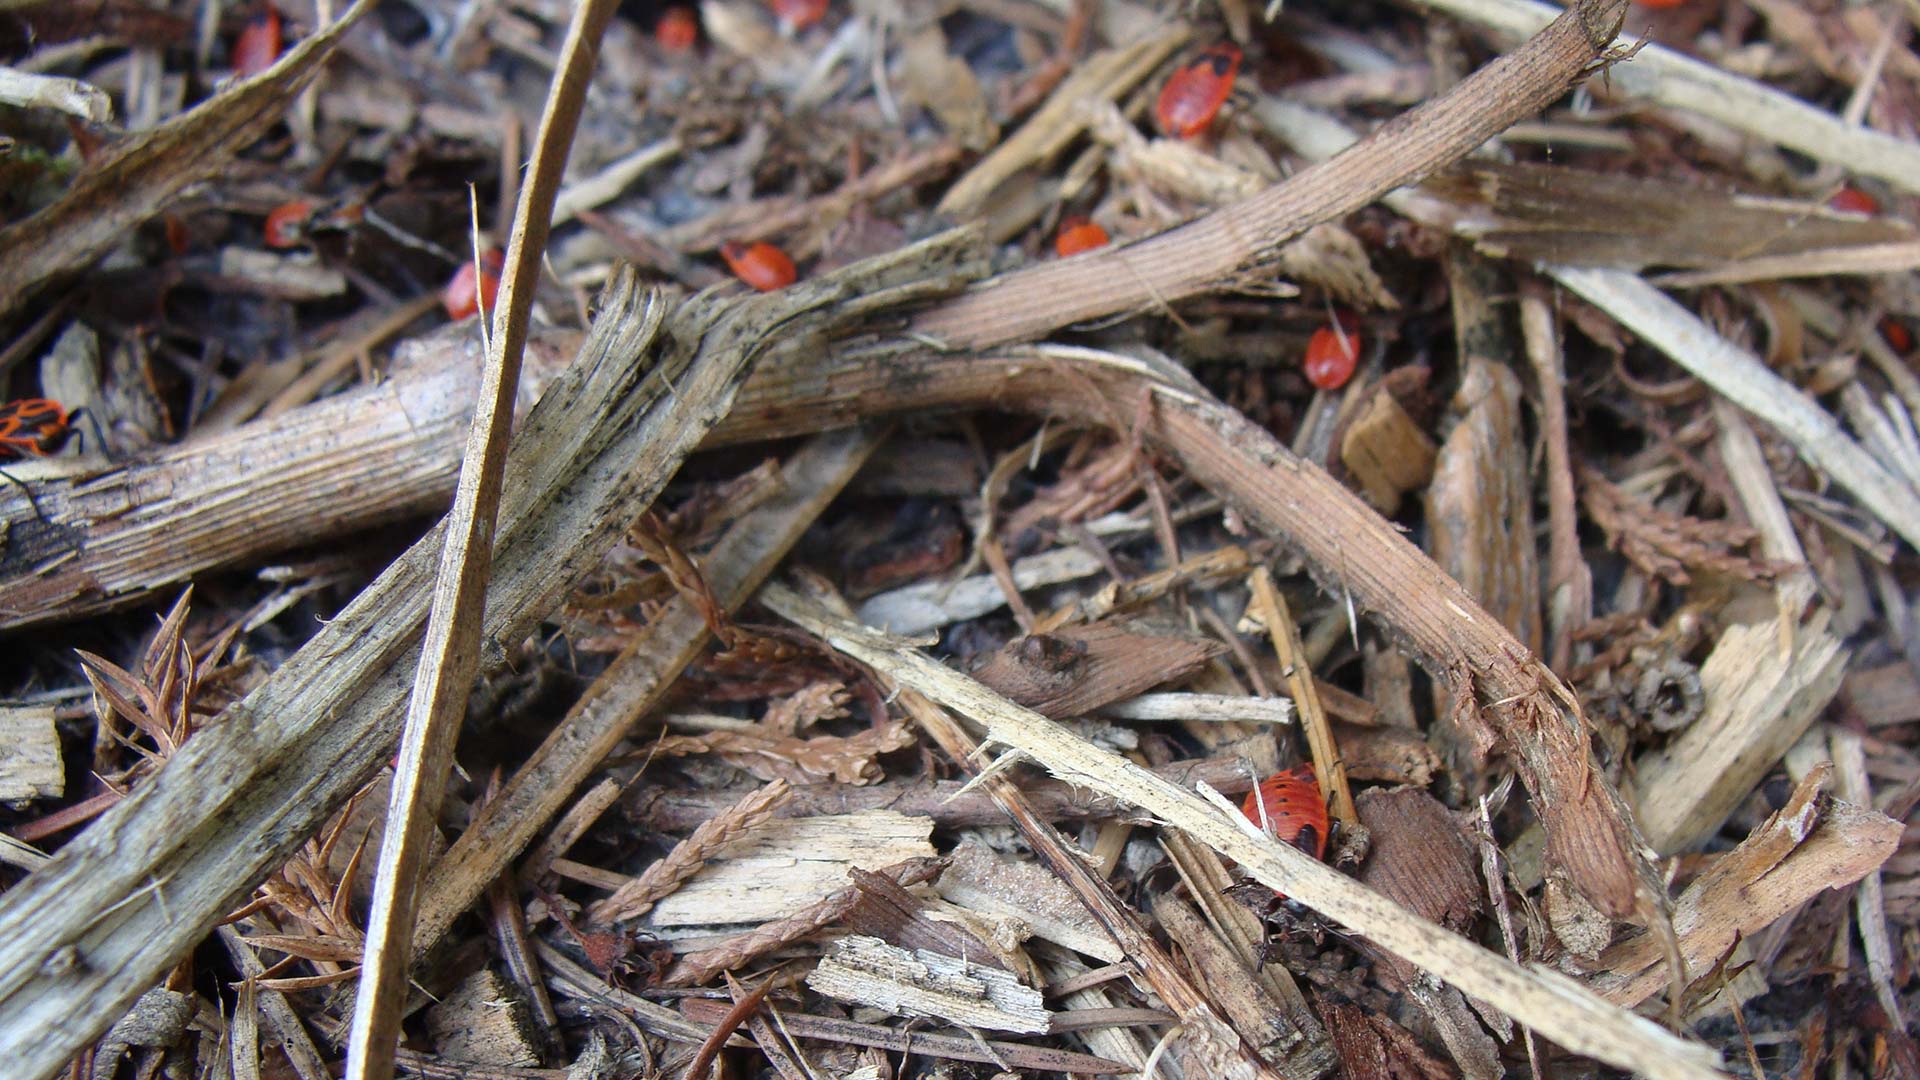 Several chinch bugs crawling in wood pieces near Macomb, MI.